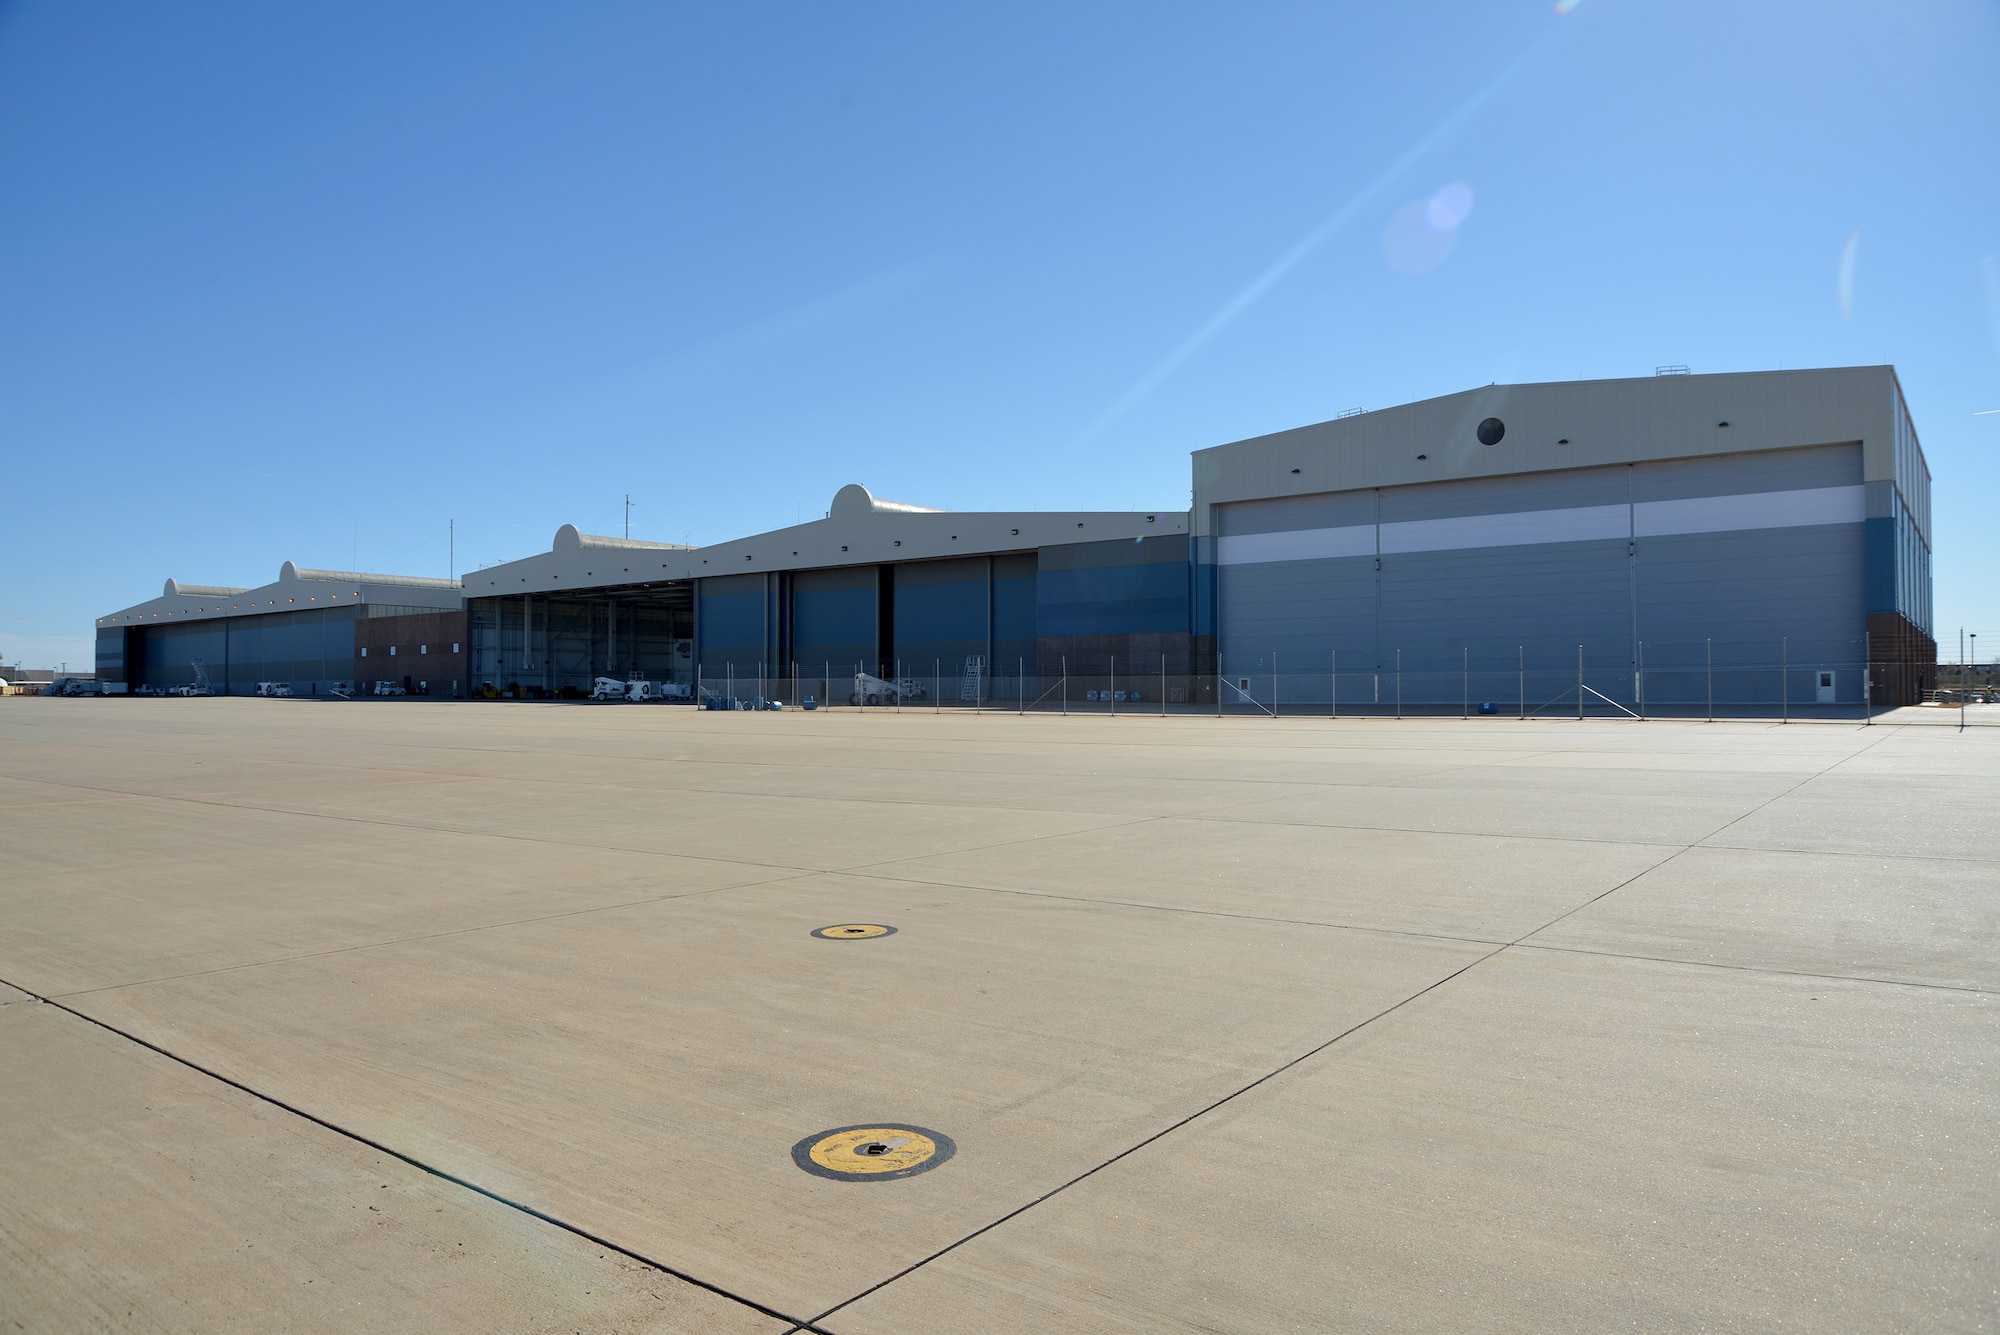 An overall view of the new Navy hangar, far right, which features its own machine shop, sheet metal shop and new offices for engineers, logisticians and key personnel of the Fleet Support Team. (Navy photo by Petty Officer 1st Class Cody Boyd)